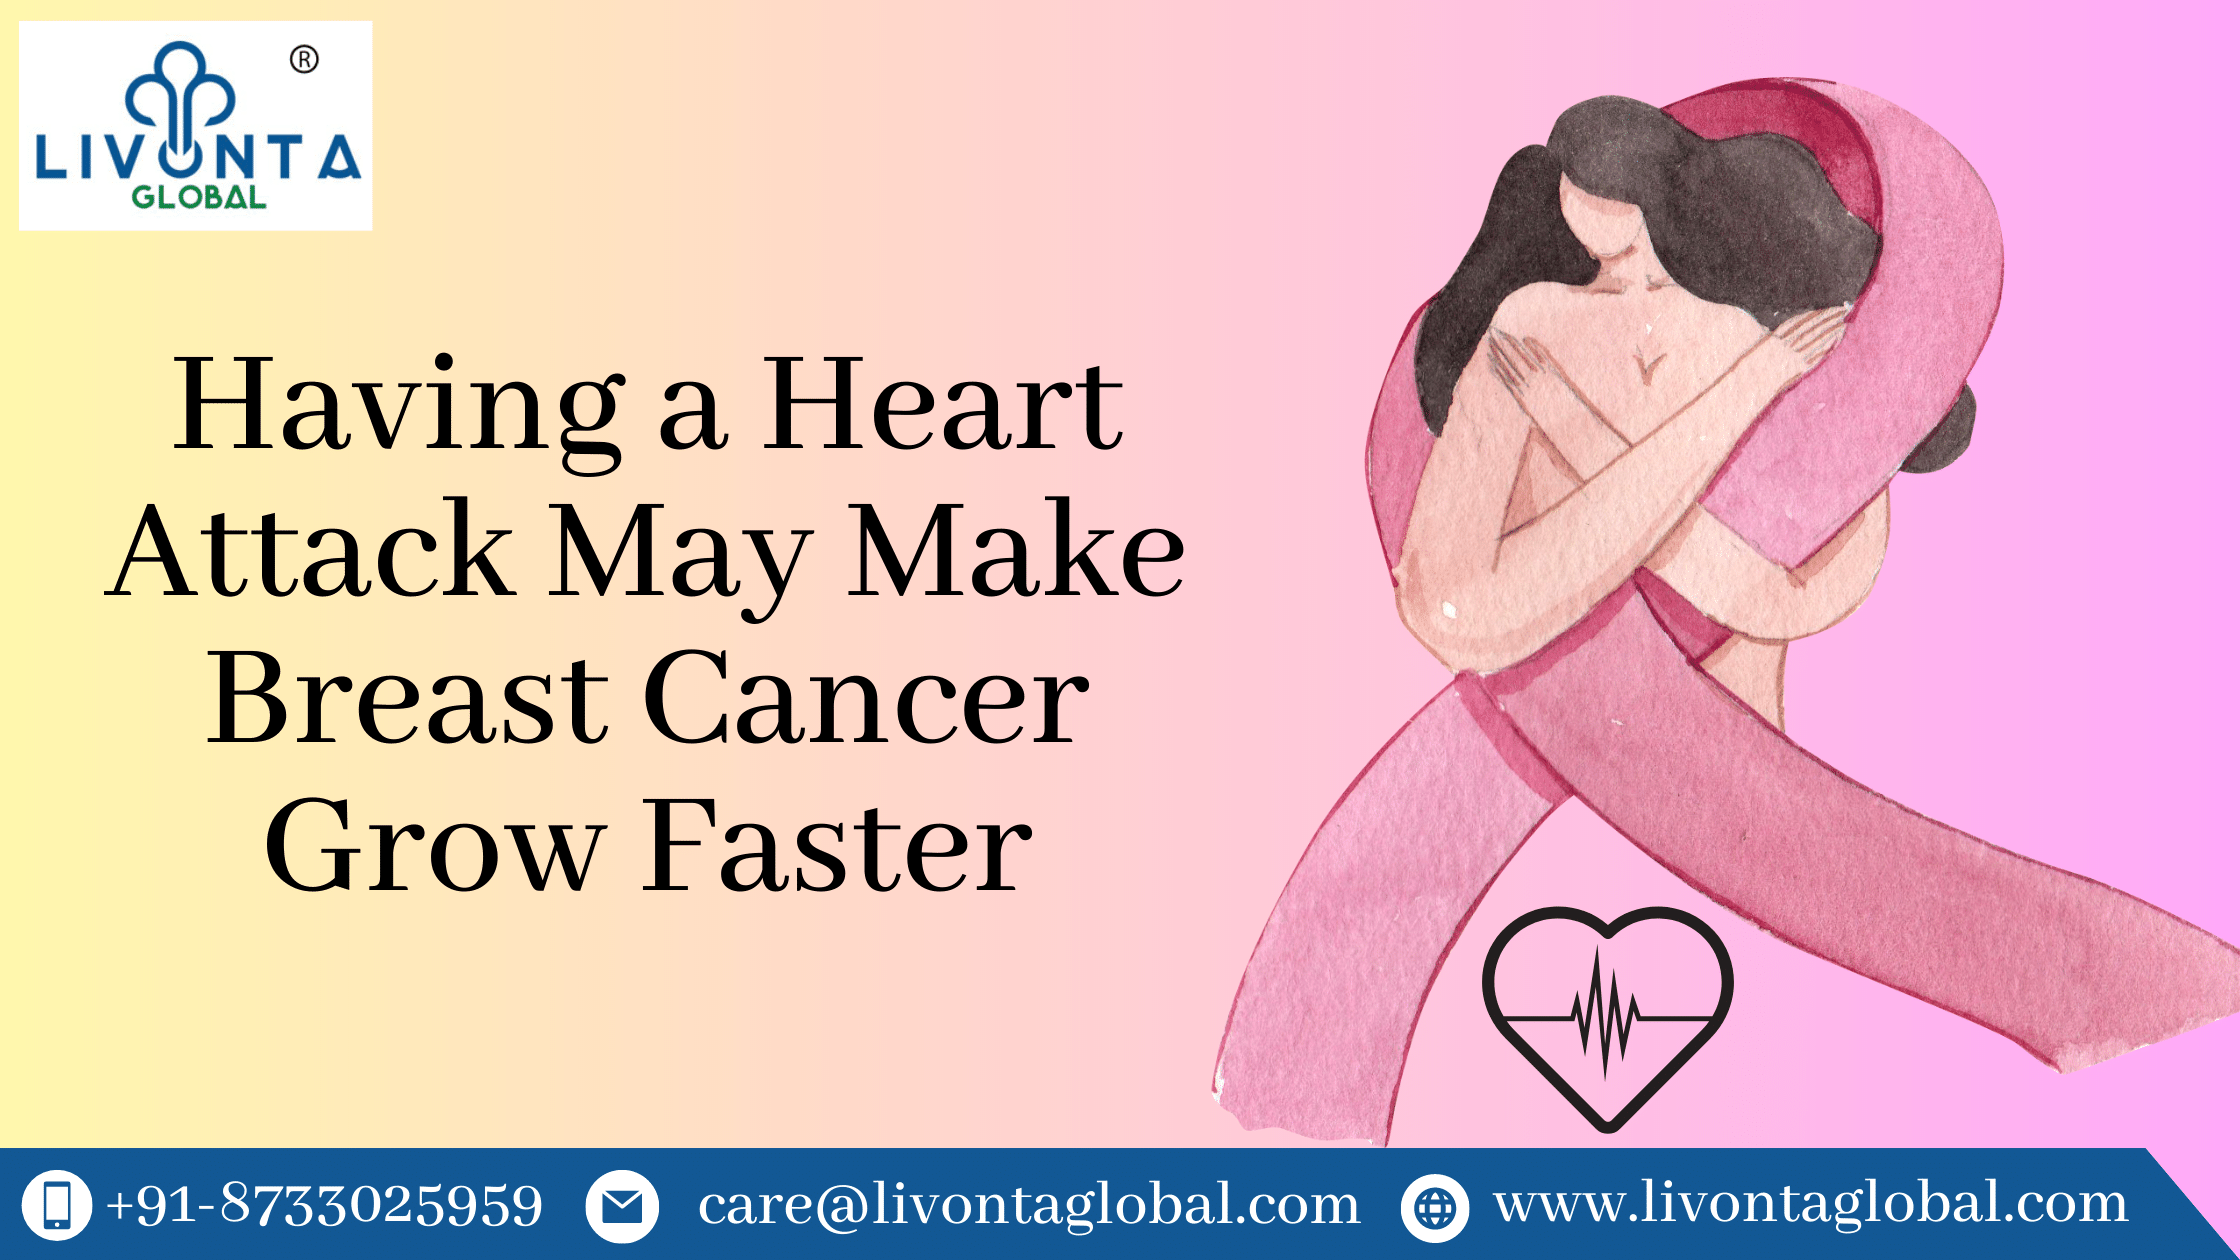 Having a Heart Attack May Make Breast Cancer Grow Faster